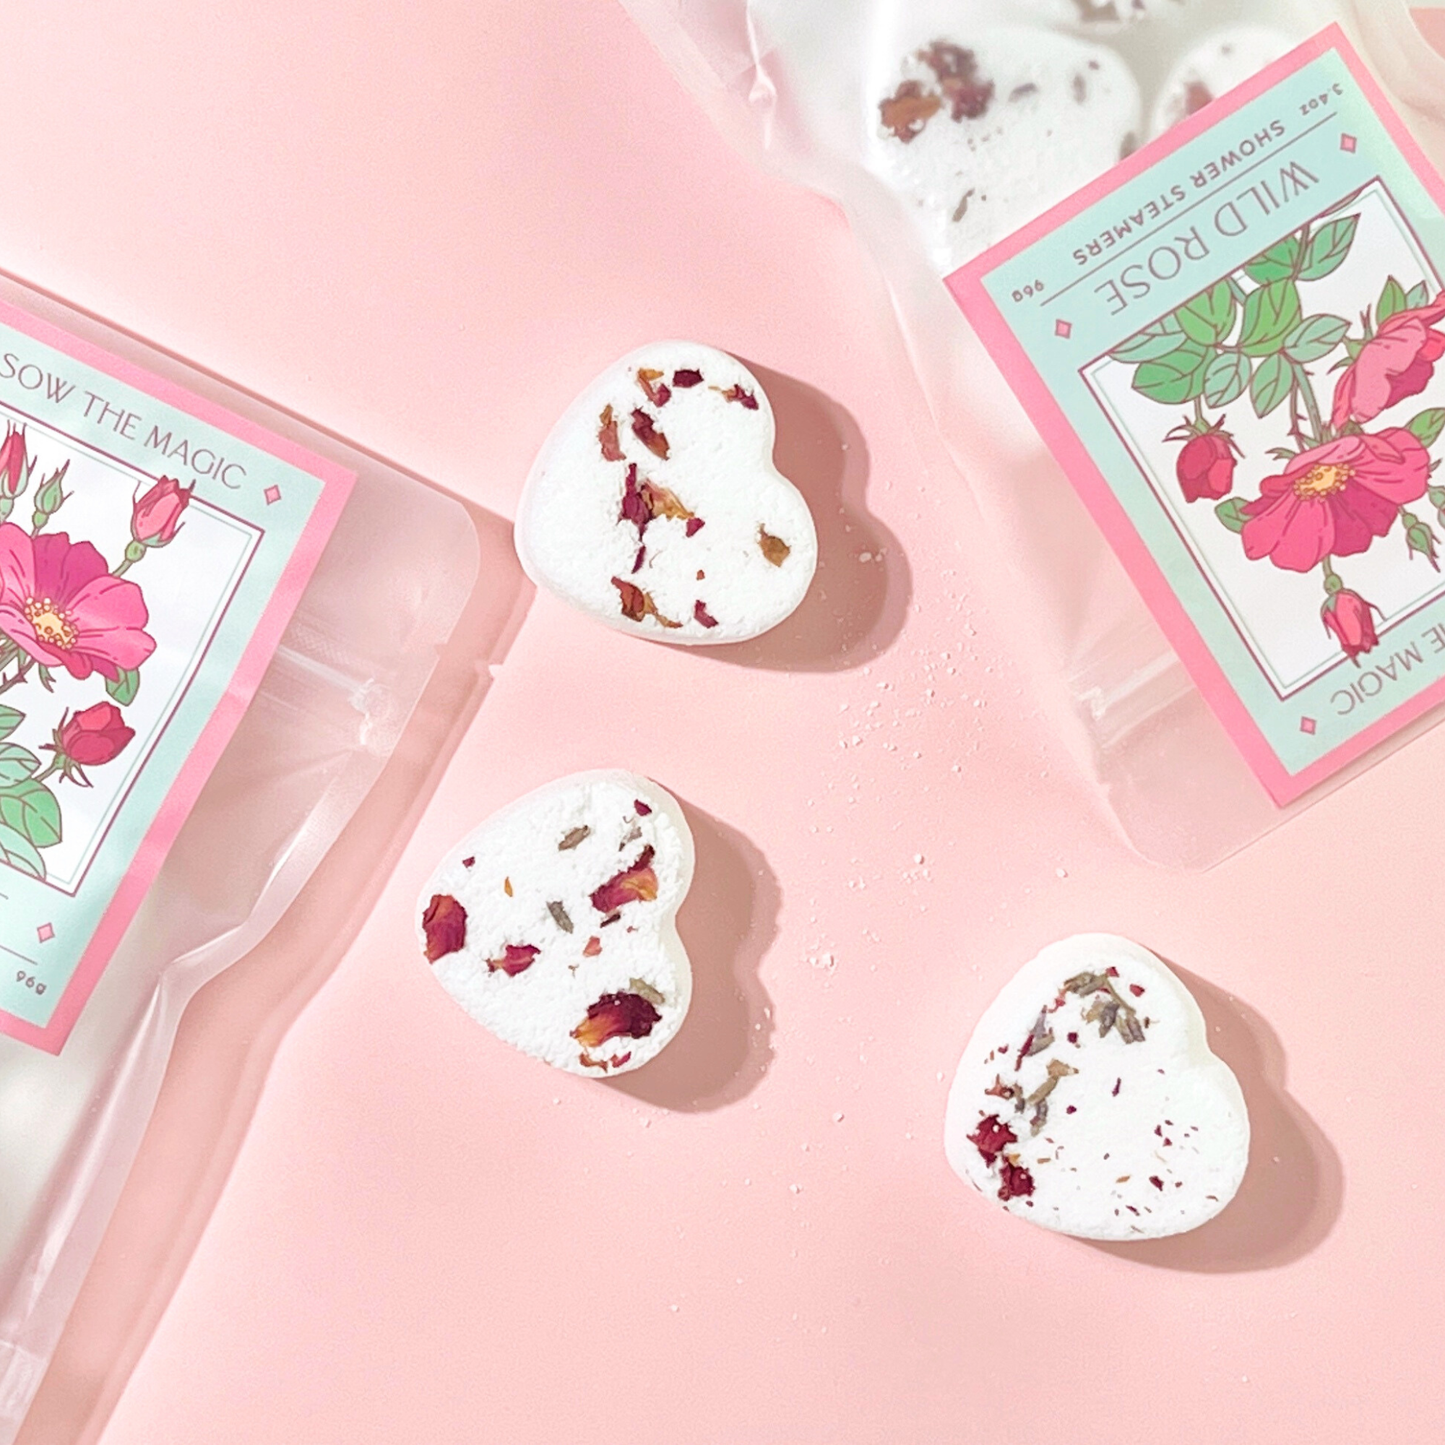 Wild Rose Heart Shower Steamers Sow the Magic